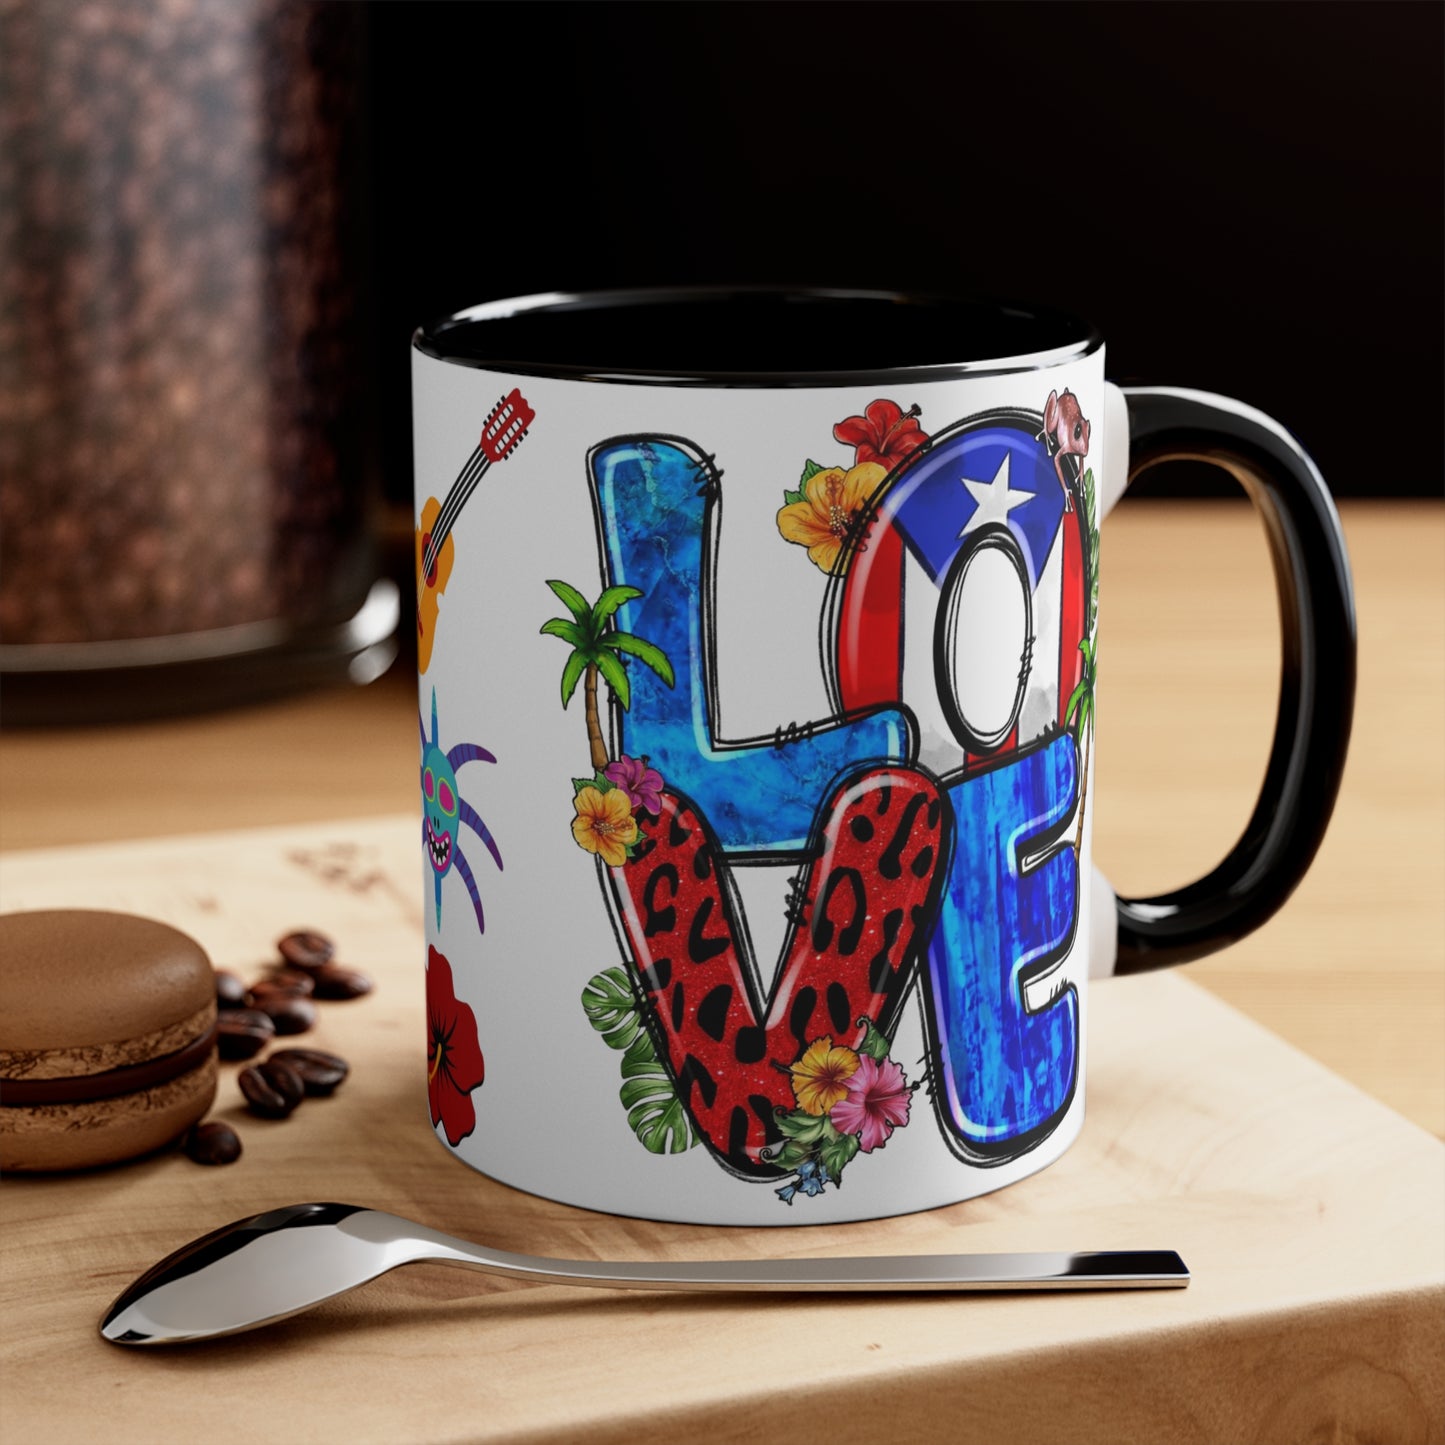 LOVE PUERTO RICO Mug with Puerto Rican Elements - Mugscity - Free Shipping - Available with Red, Blue or Black Accents